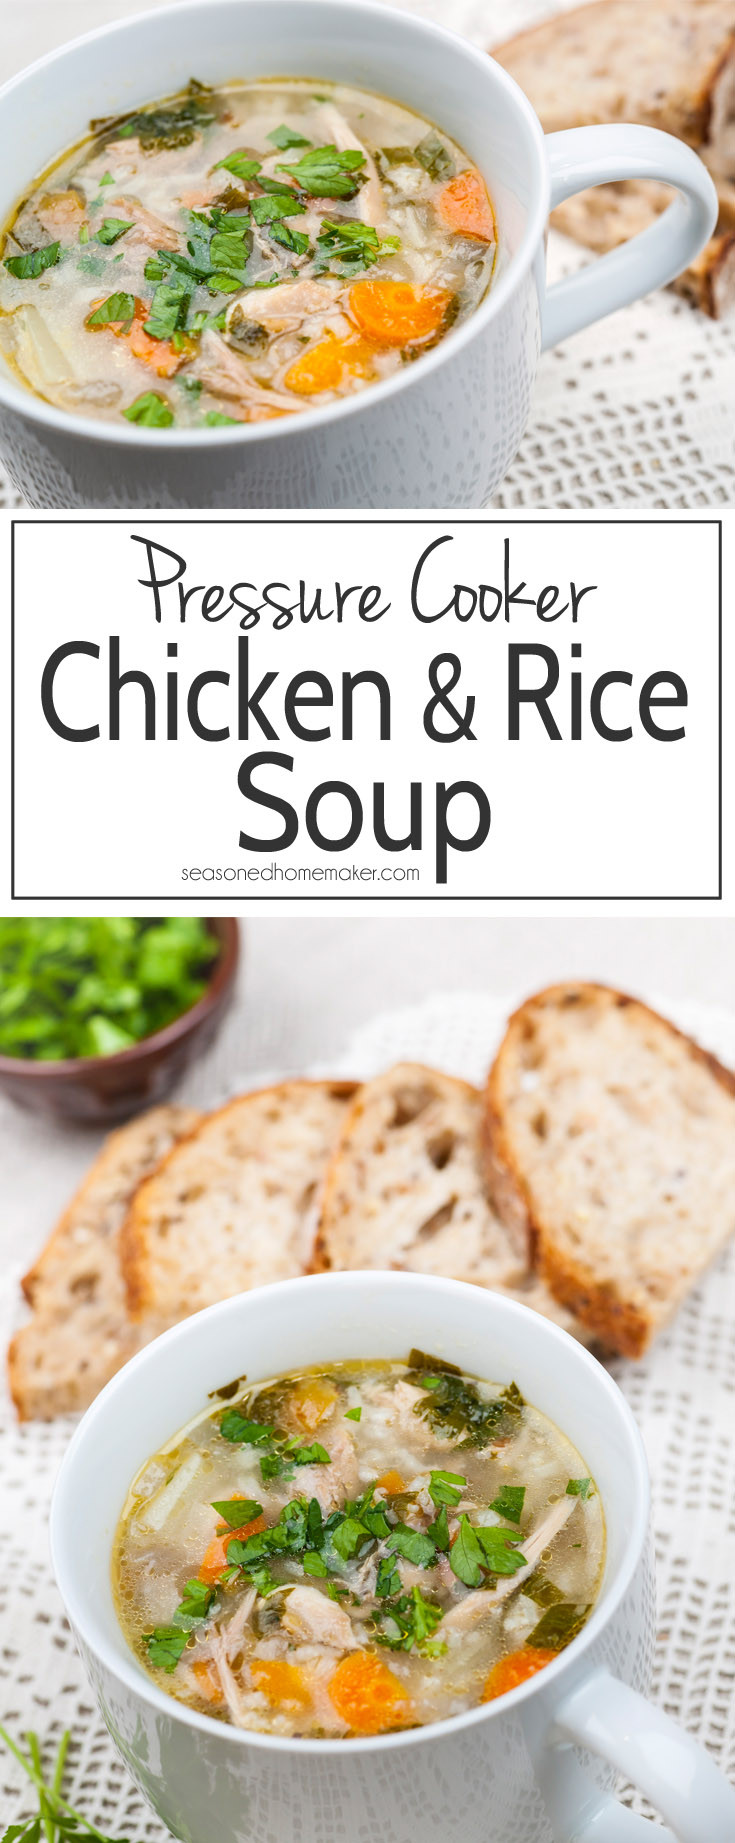 Chicken Soup With Rice
 Pressure Cooker Chicken and Rice Soup The Seasoned Homemaker